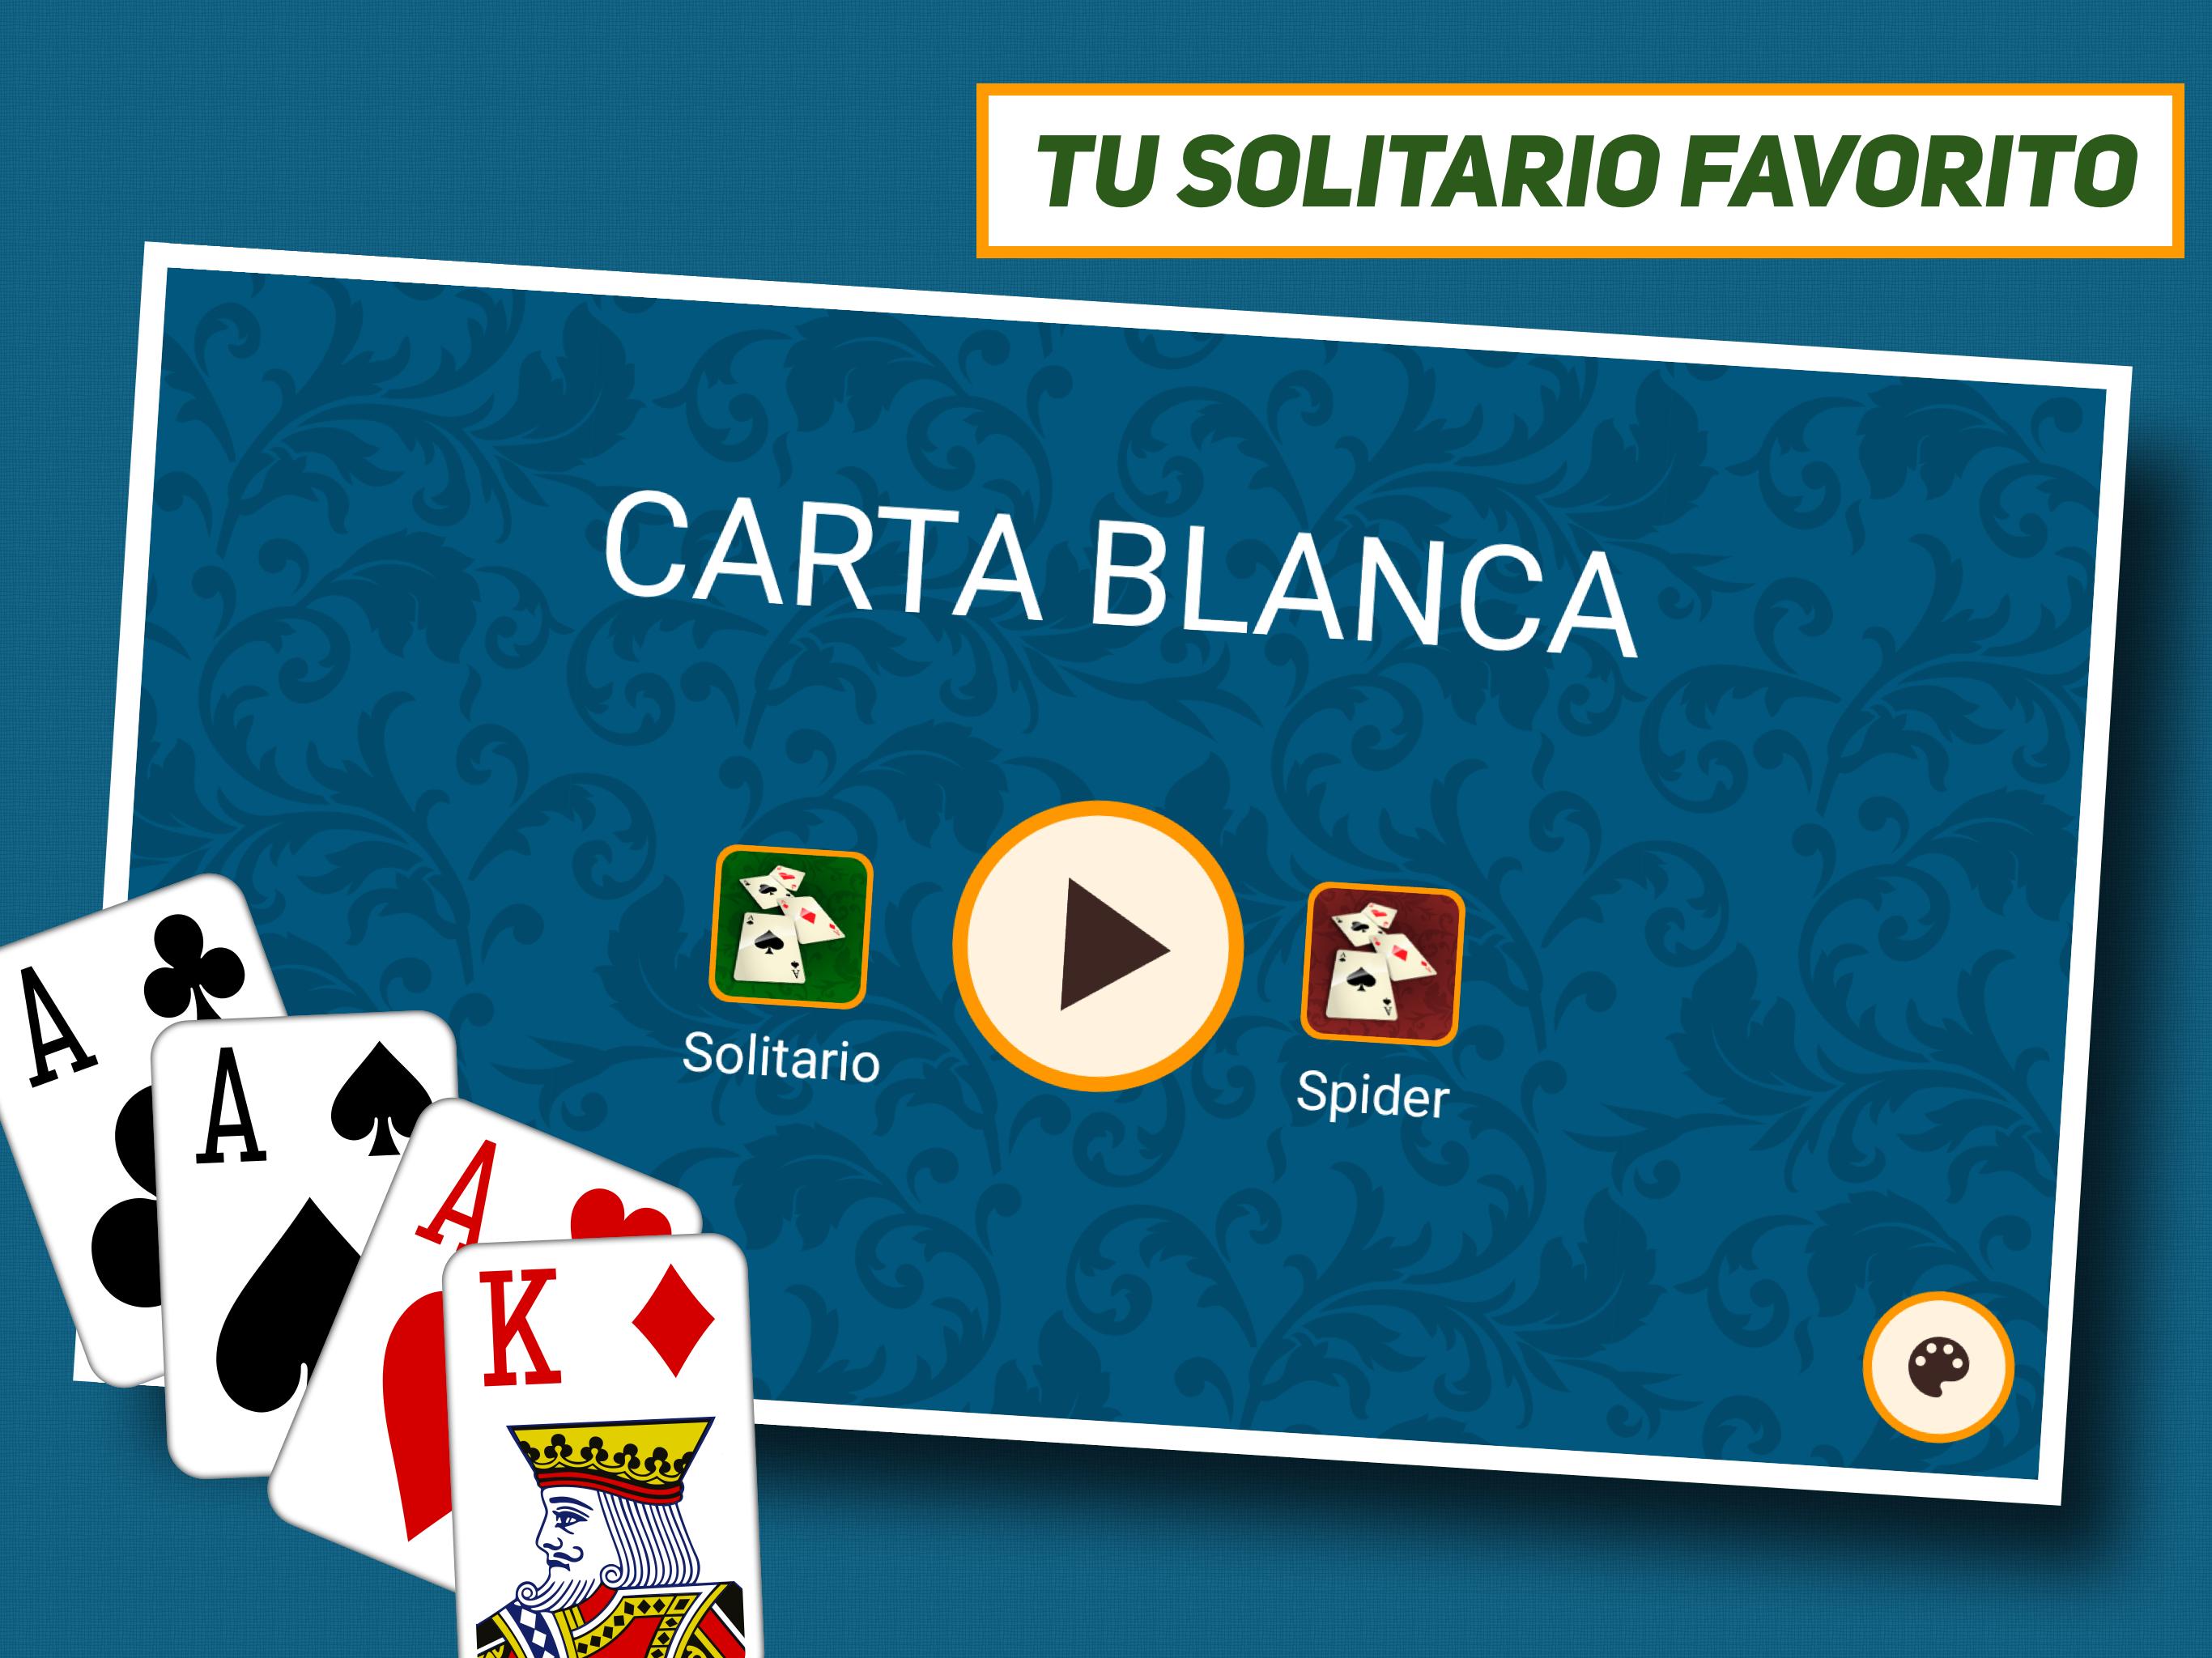 Freecell (Carta Blanca) for Android - APK Download